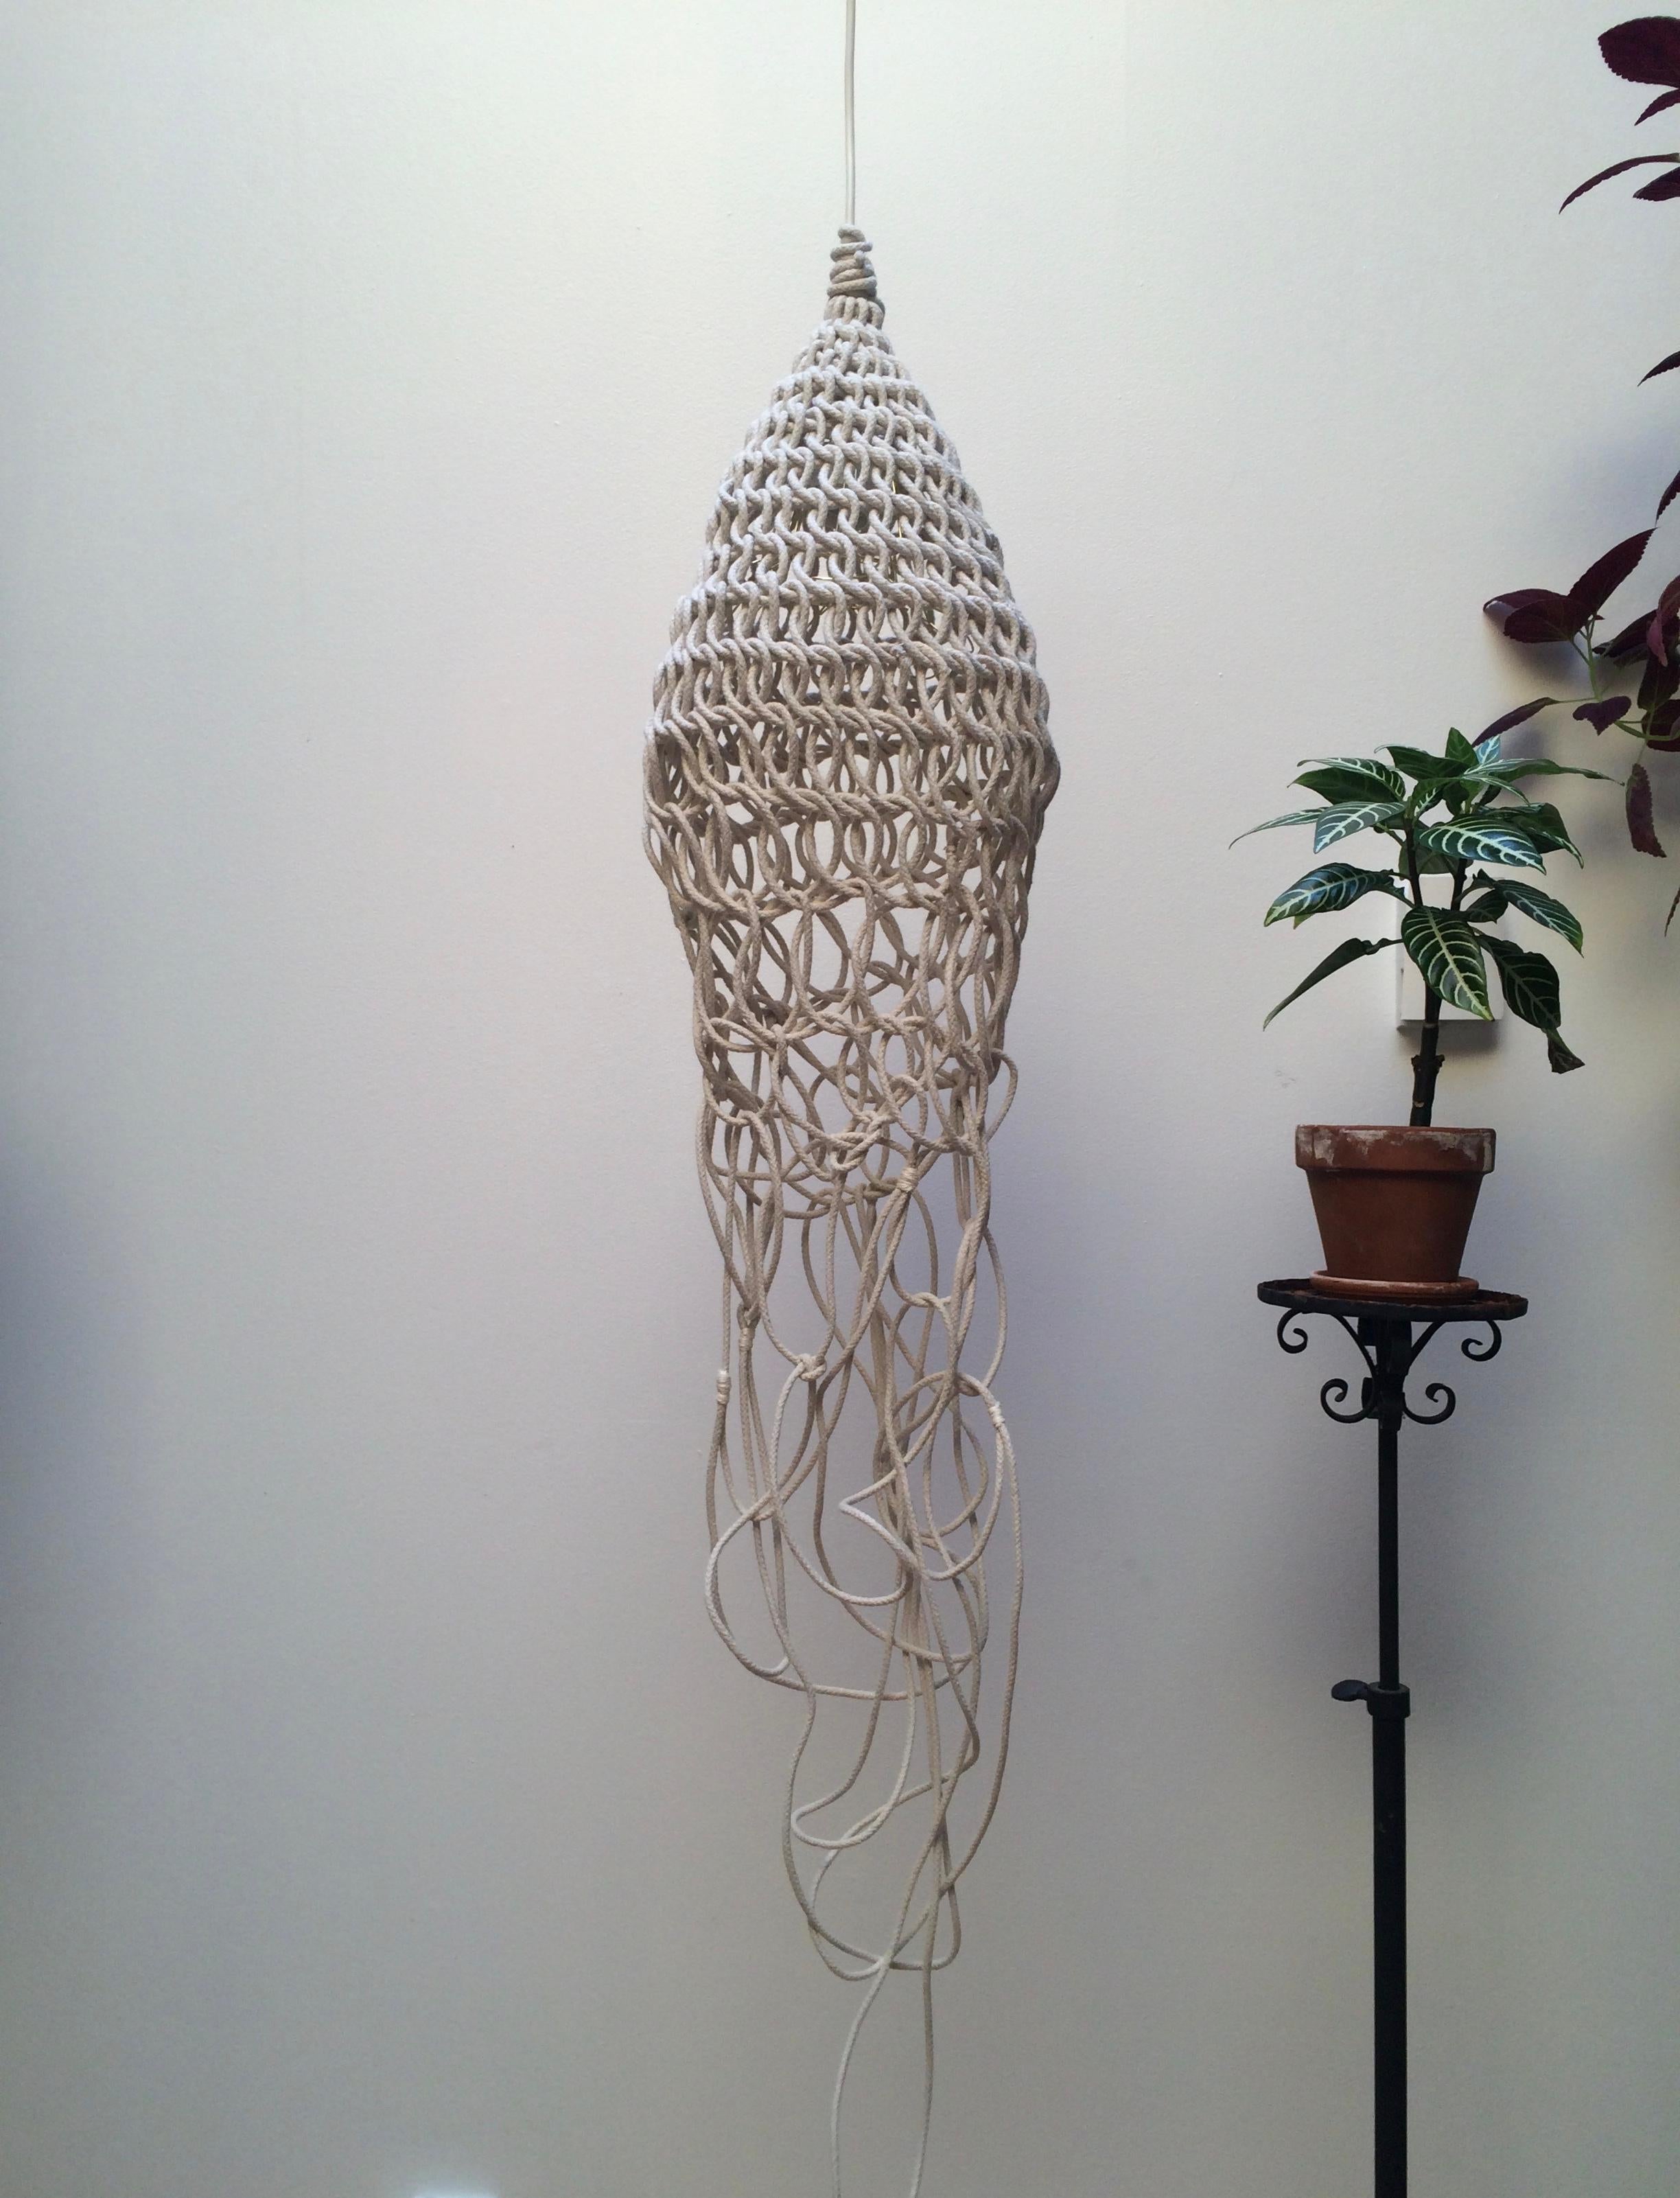 Hand-Crafted Medusa Sculptural Lamp Hand Crocheted by Annie Legault Amulette For Sale